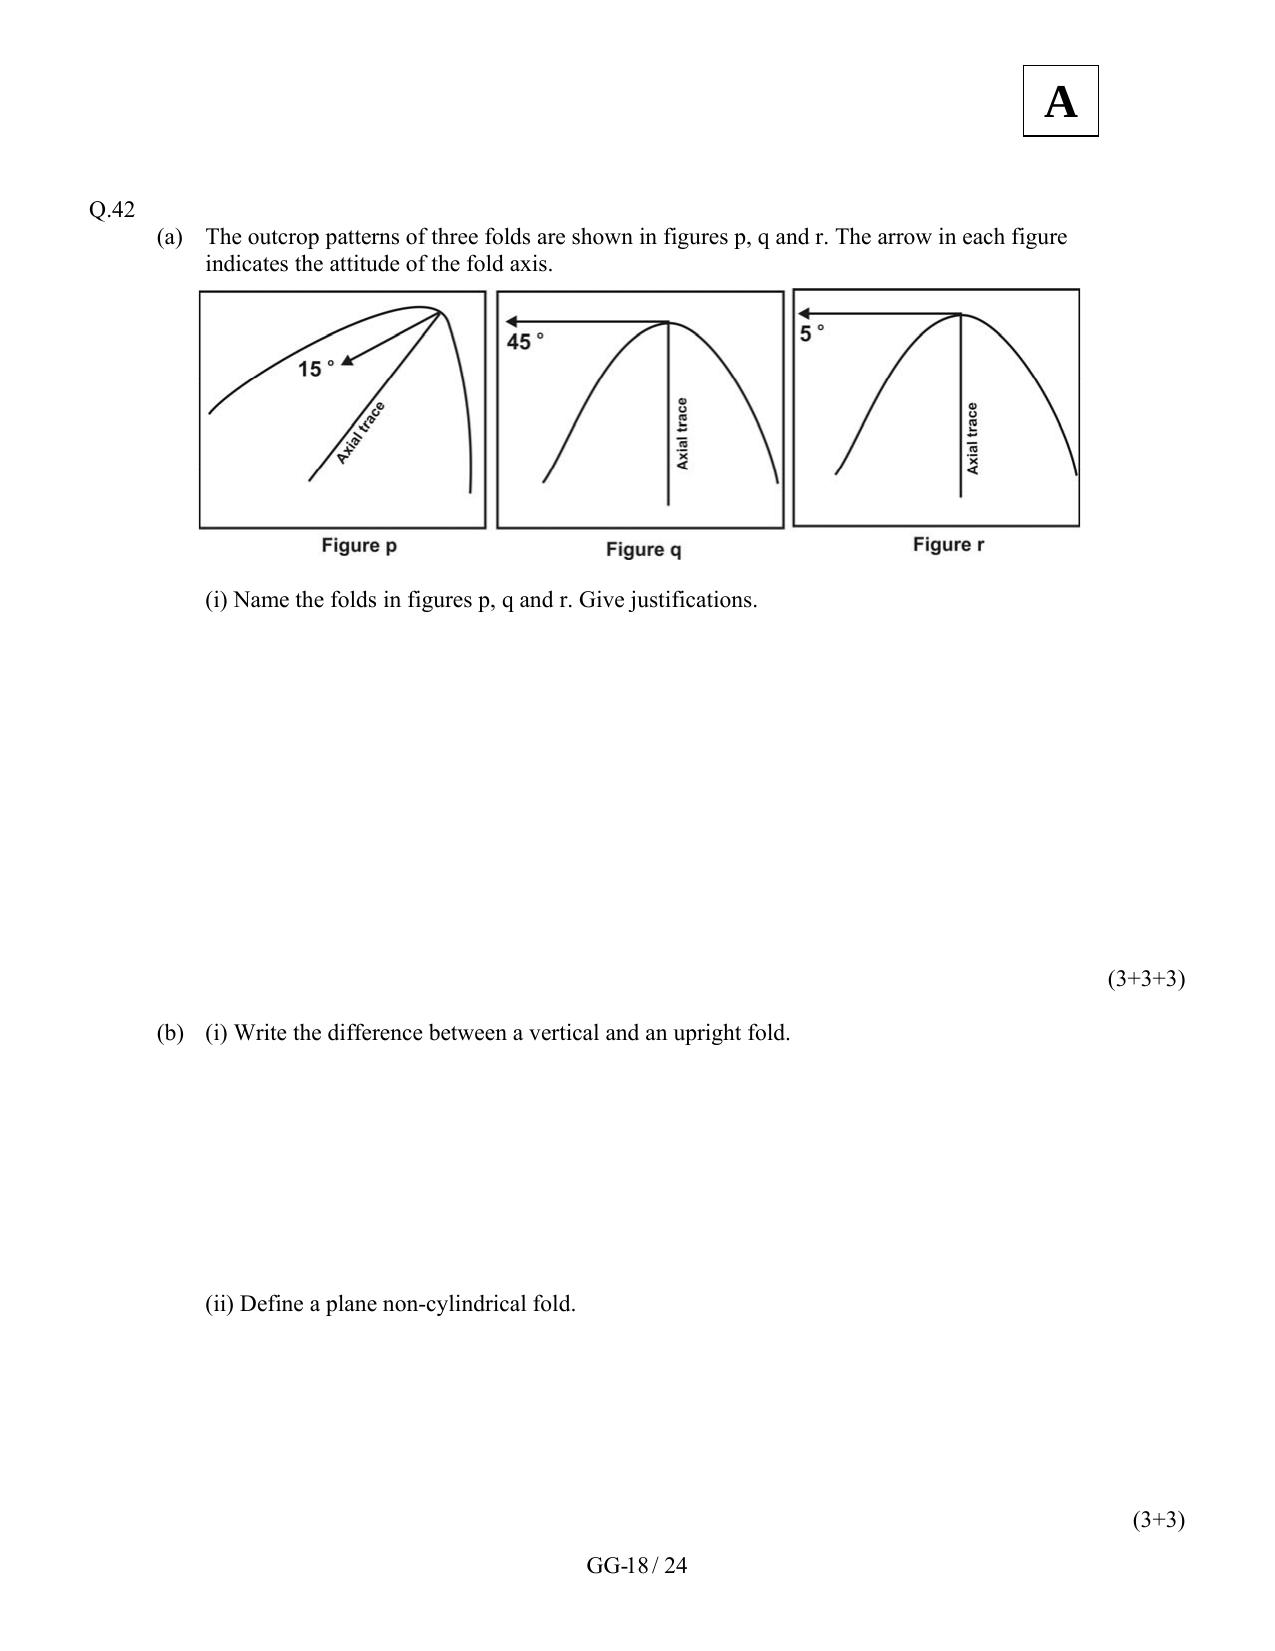 JAM 2012: GG Question Paper - Page 20